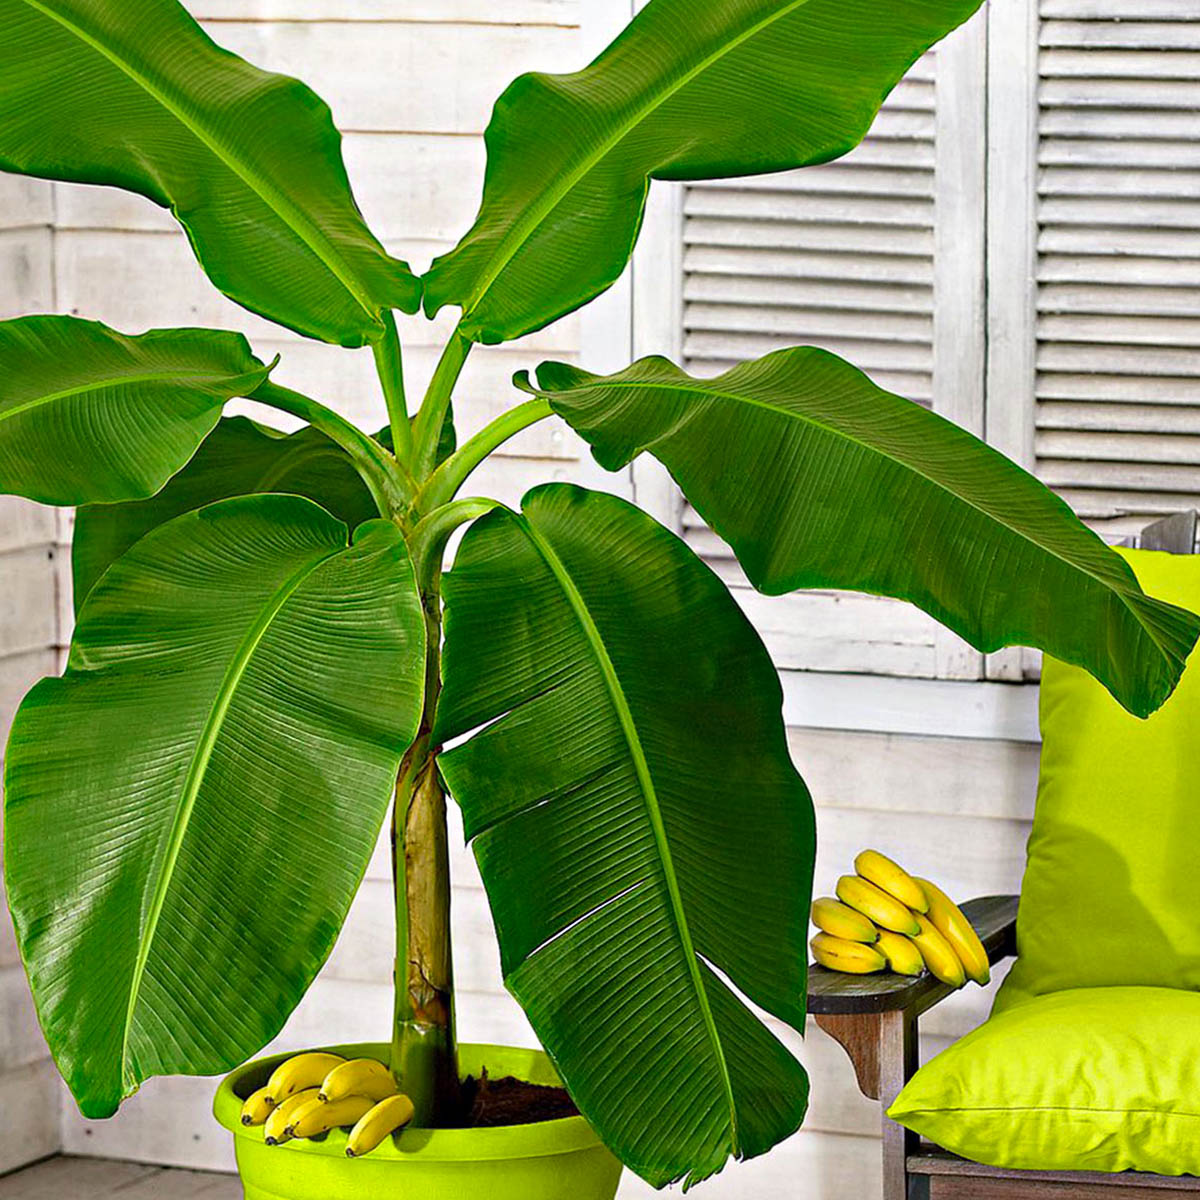 musa-basjoo-is-the-perfect-outdoor-banana-plant-featured